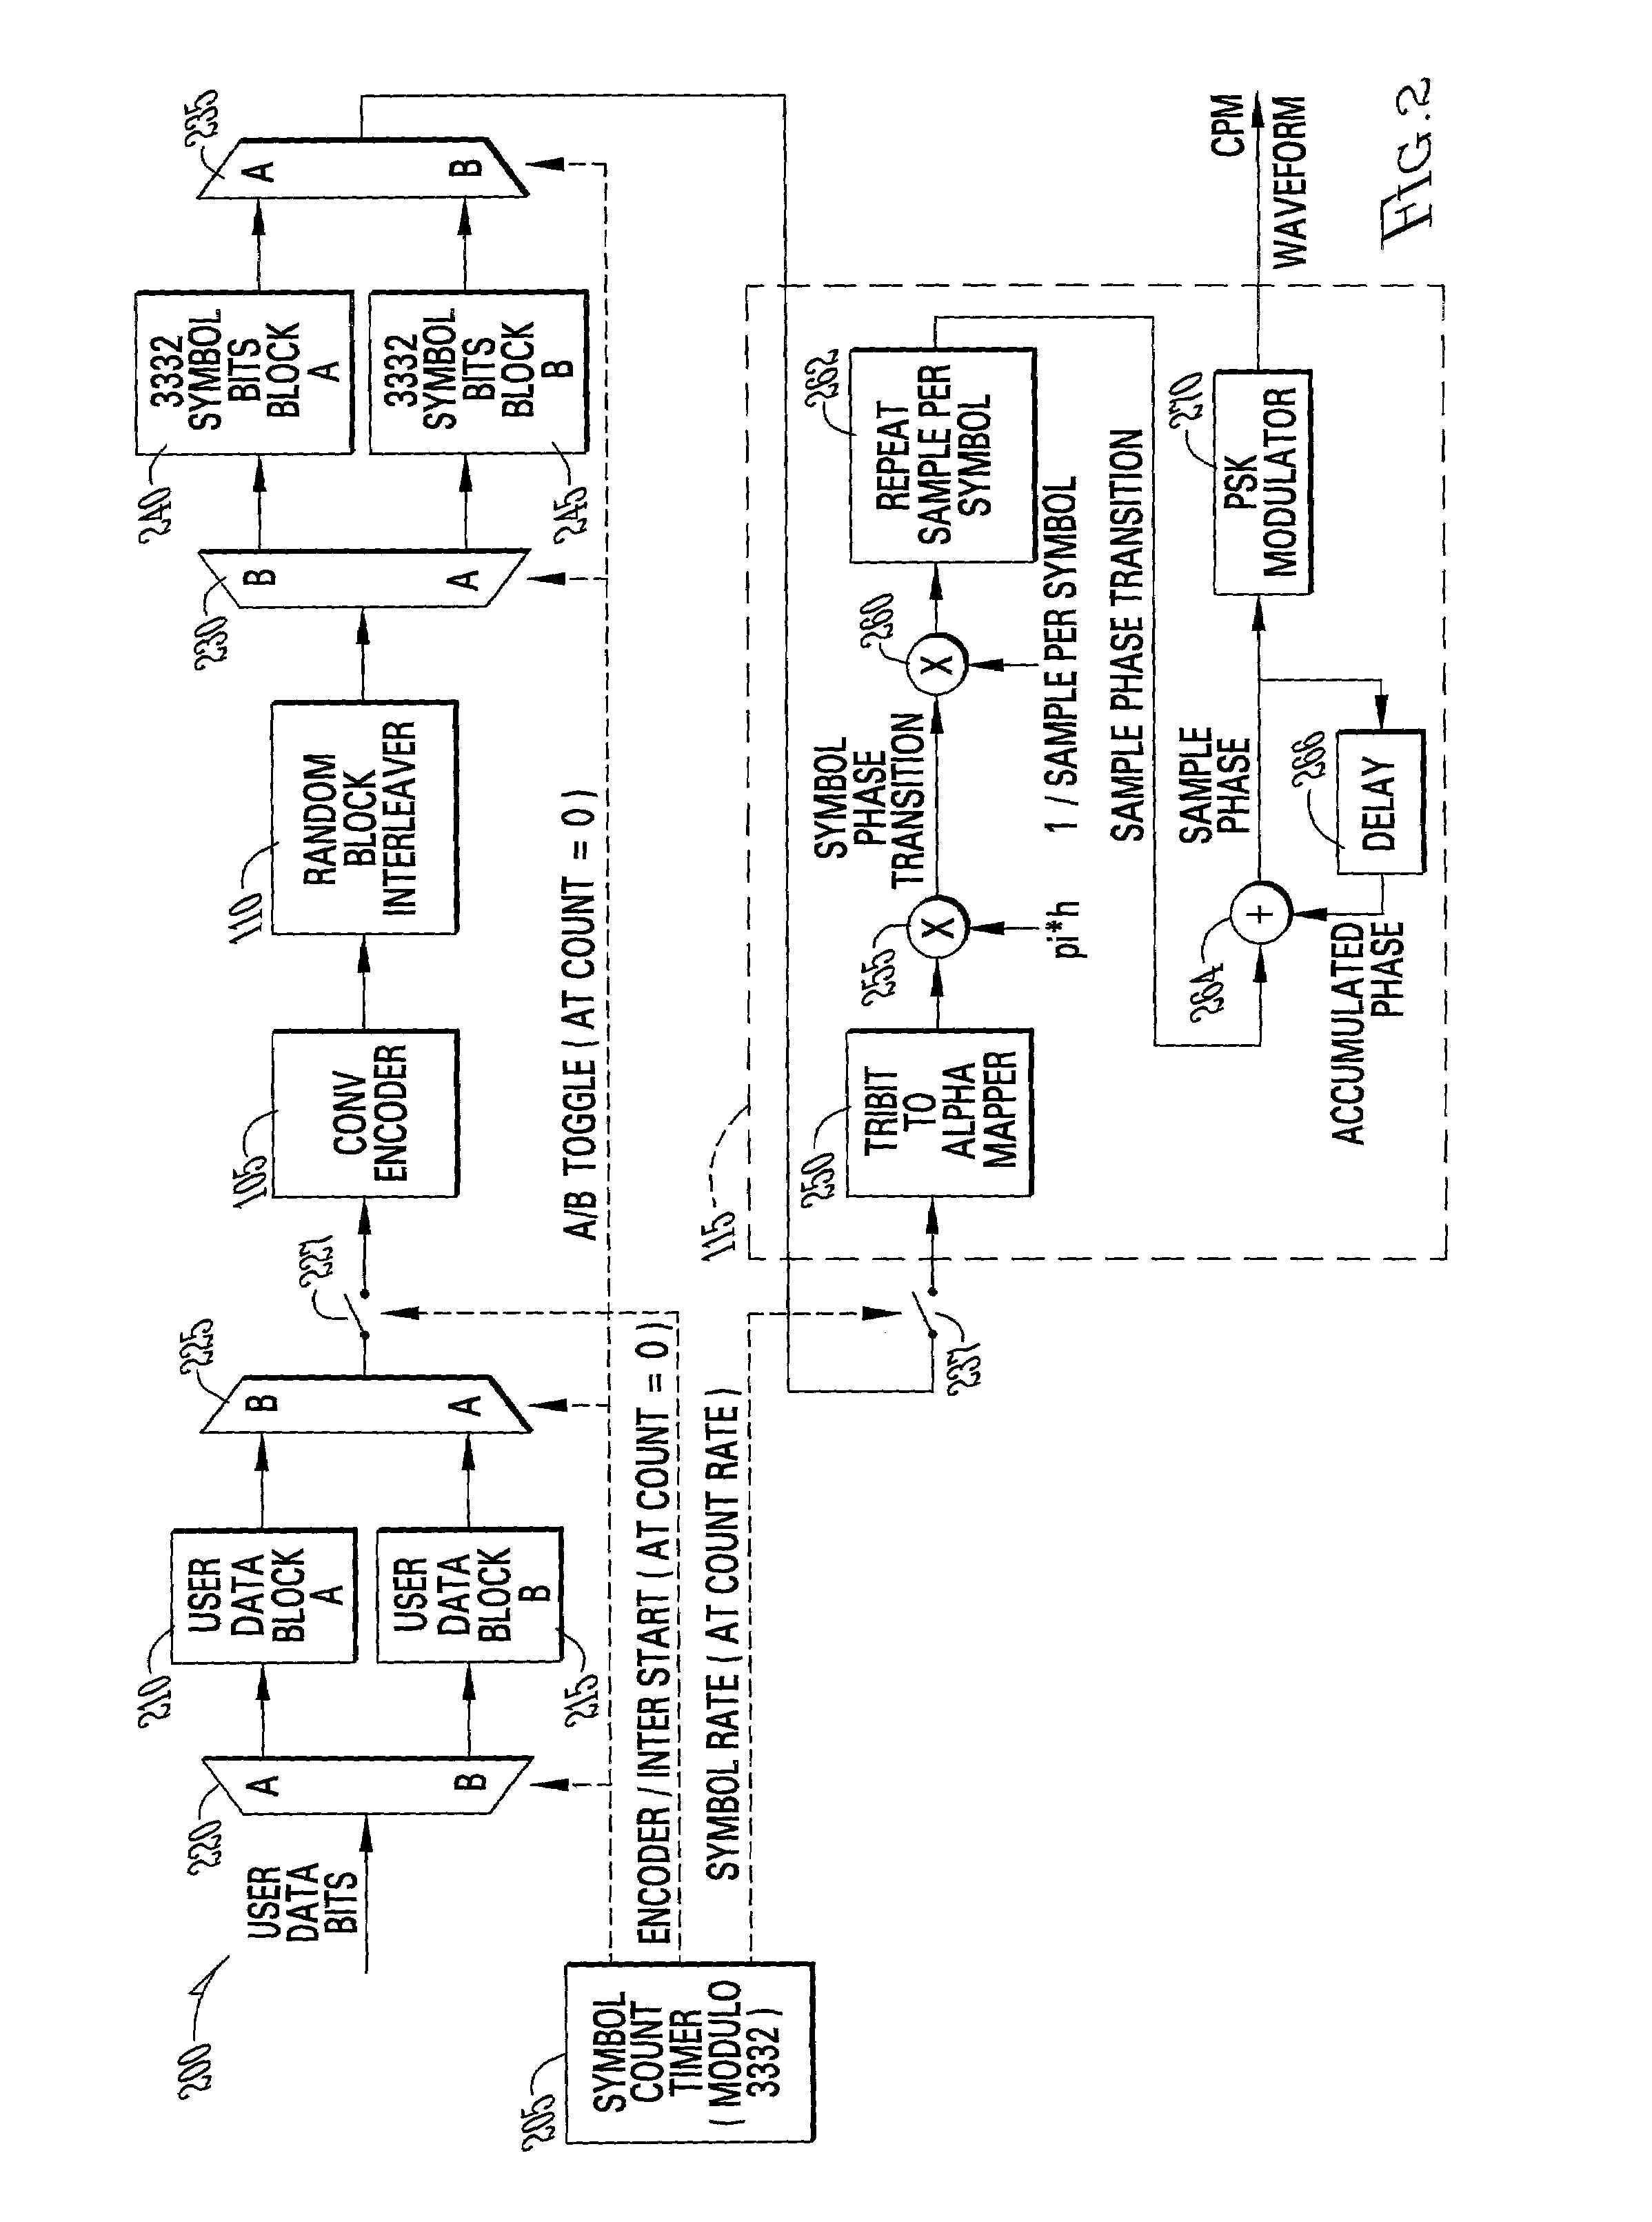 Synchronization method and apparatus for modems based on jointly iterative turbo demodulation and decoding